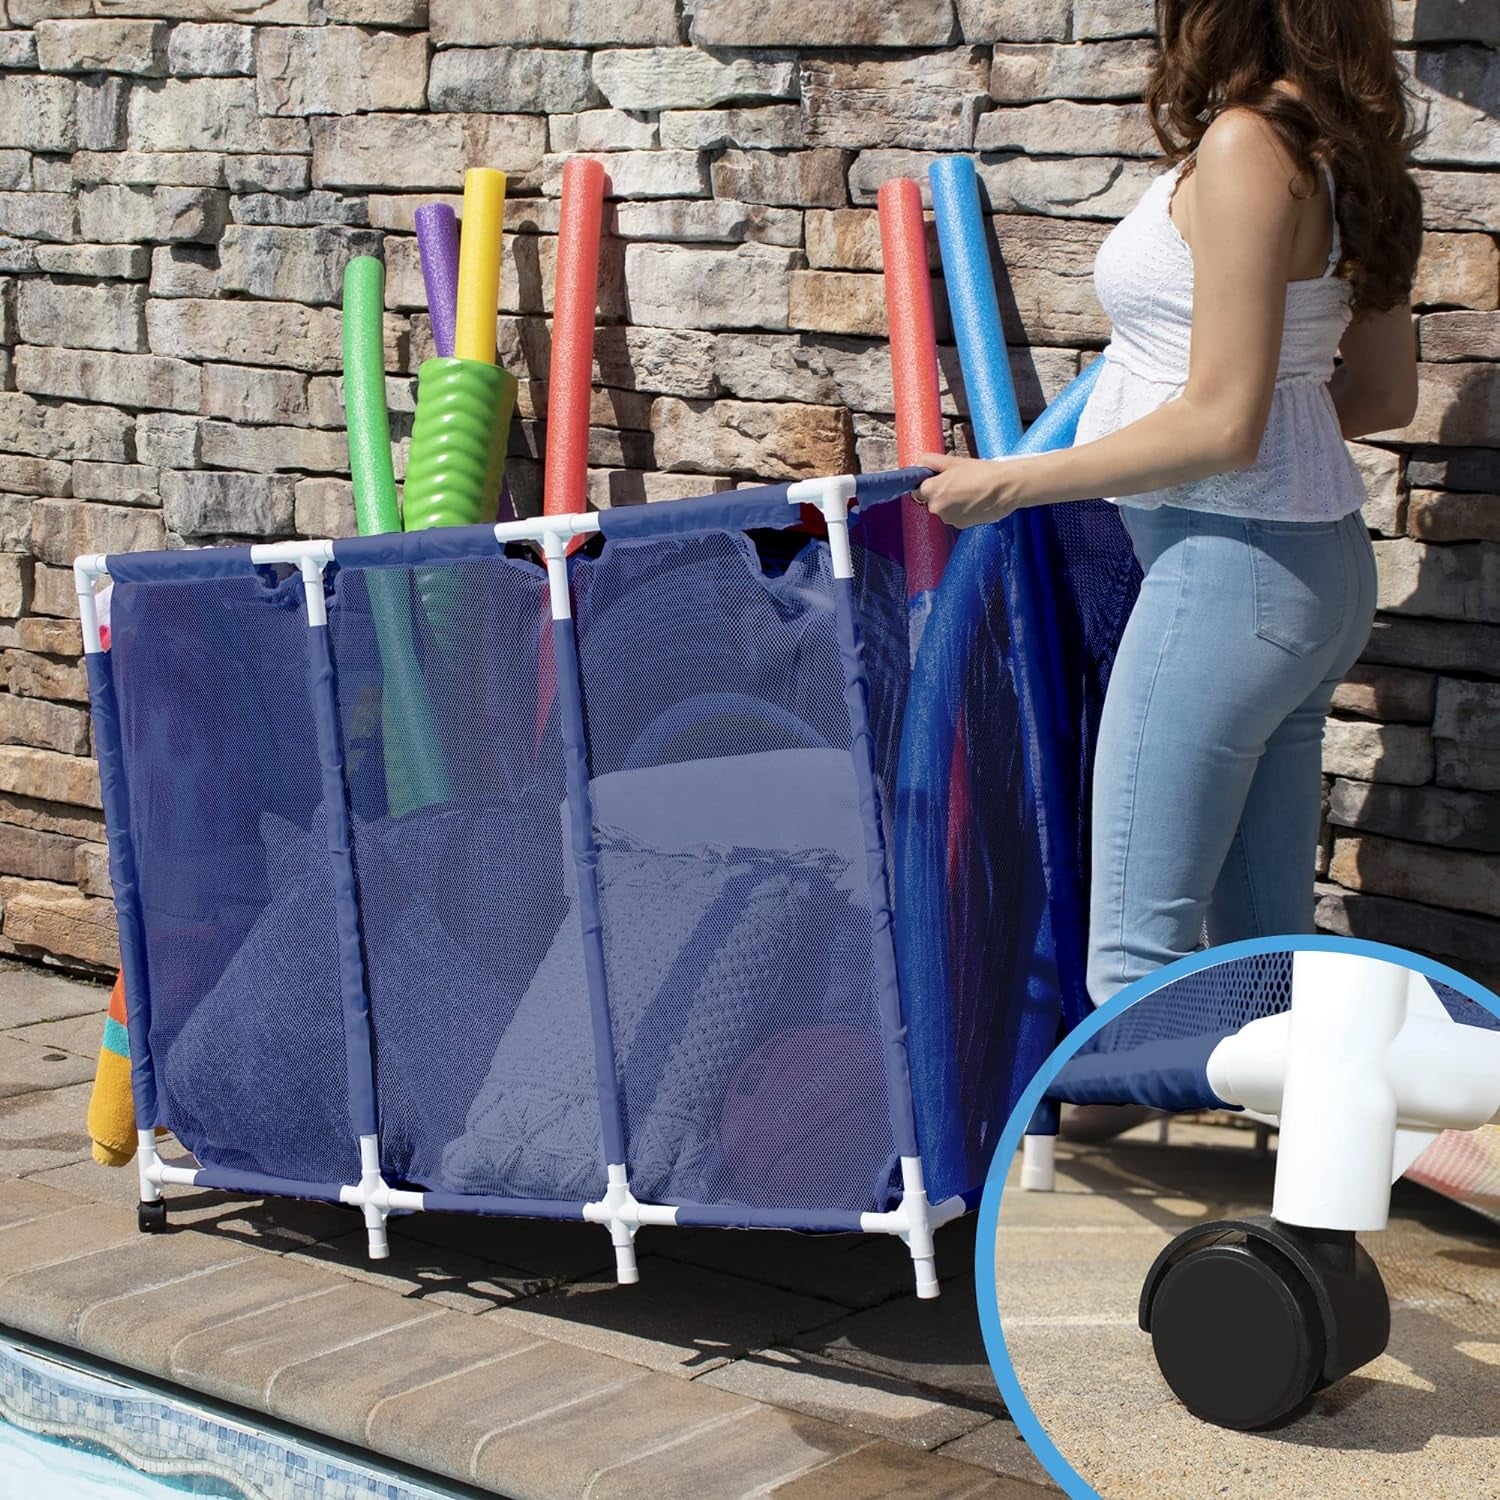 Pool Noodles Holder, Toys, Floats, Balls and Floats Equipment Mesh Rolling Storage Organizer Bin, Extra-Large, (47.2" W X 30.2" L X 34" H), Blue/White Style 455119